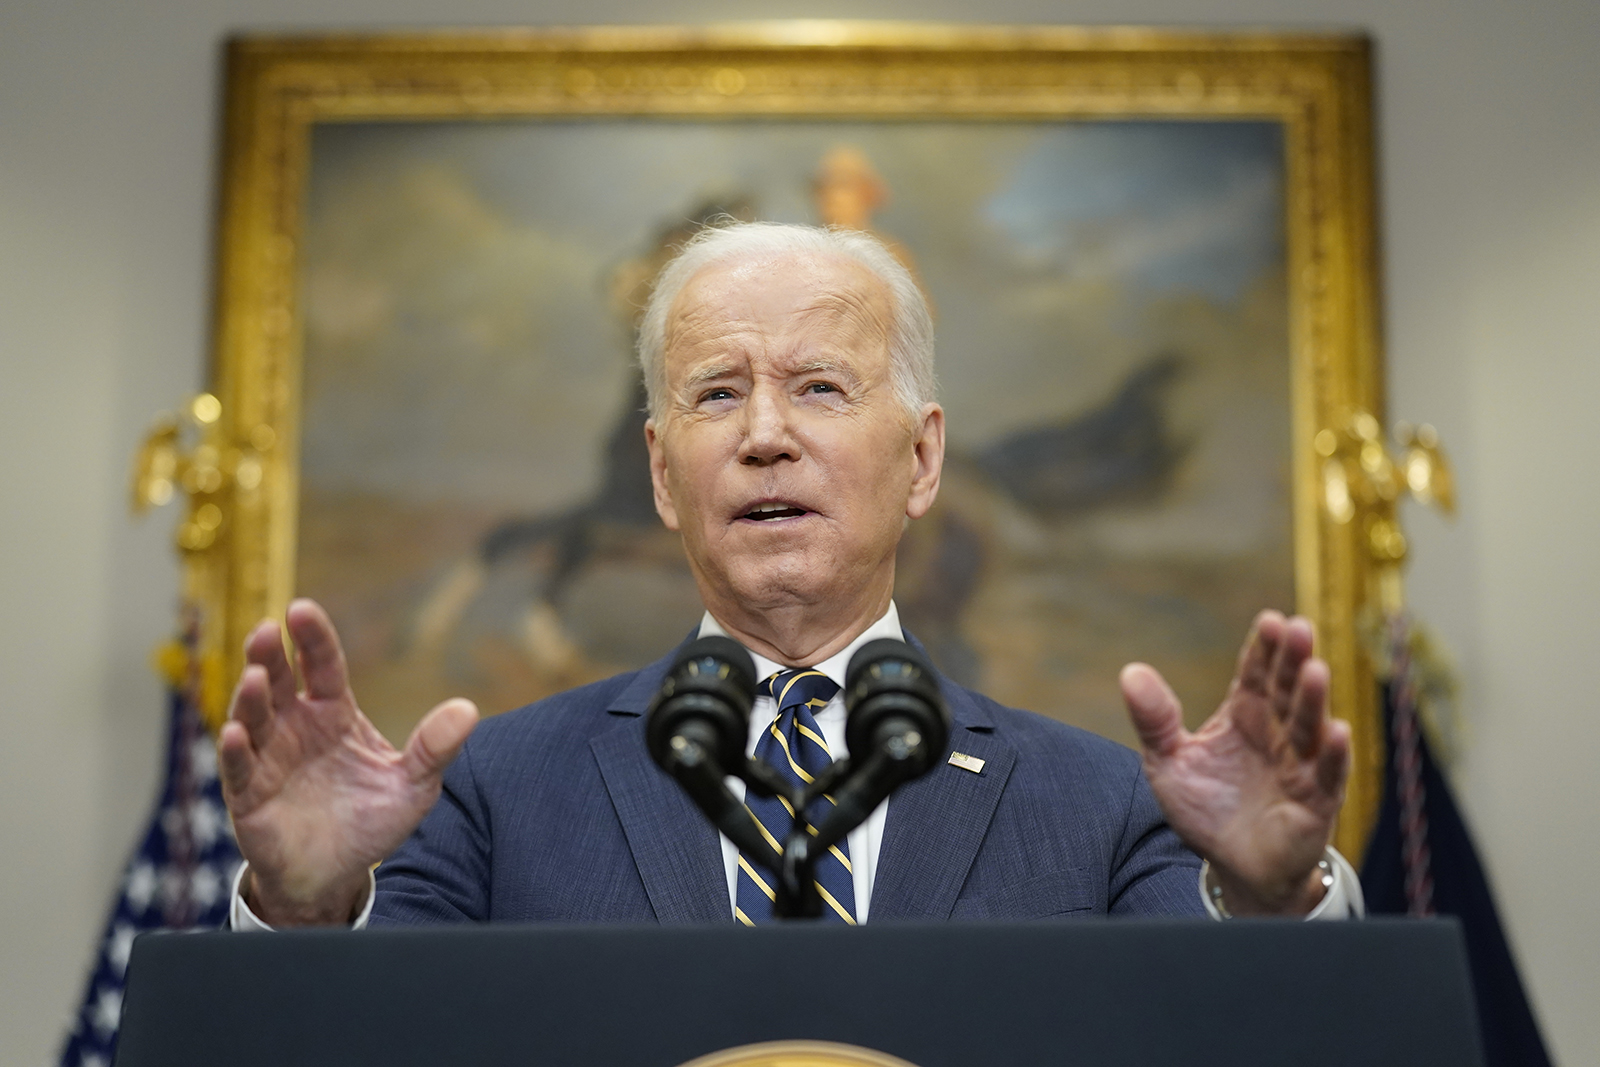 President Joe Biden during a speech at the White House on March 11.